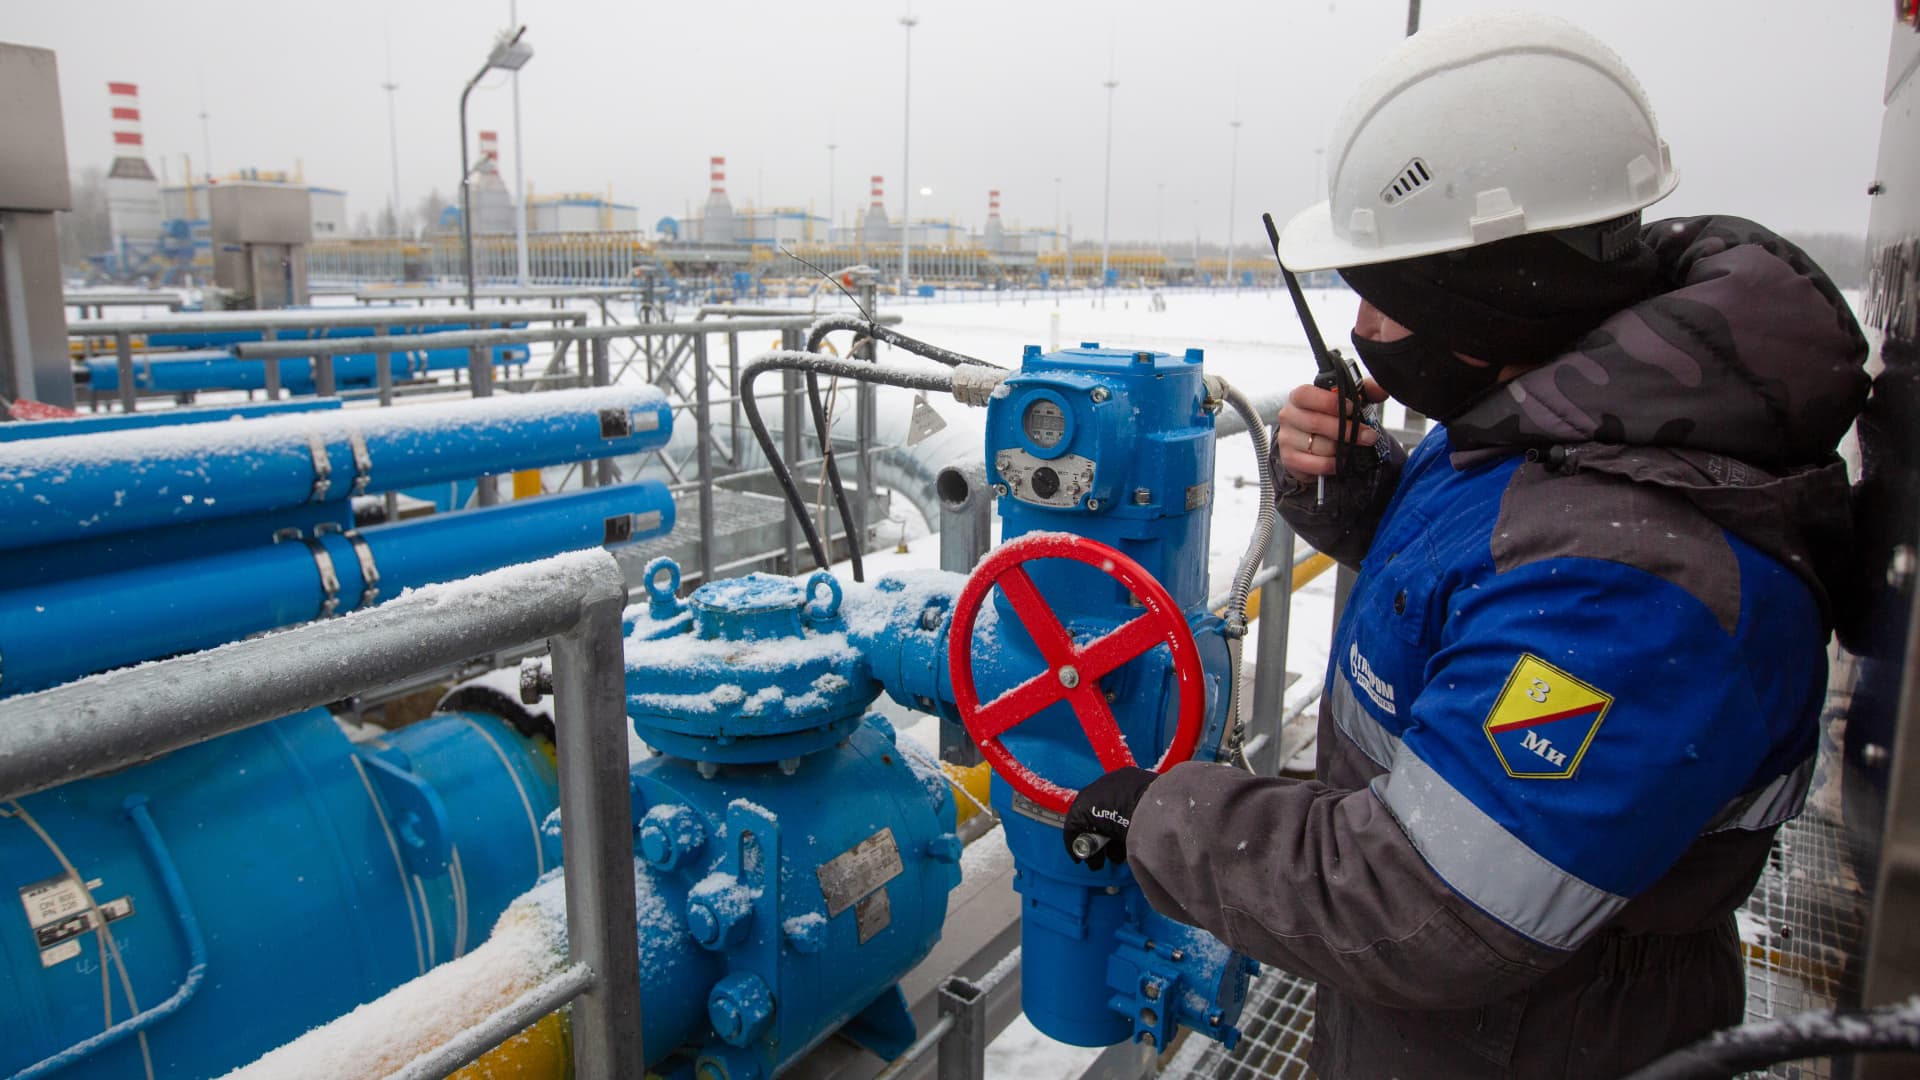 A worker adjusts a pipeline valve at the Gazprom PJSC Slavyanskaya compressor station, the starting point of the Nord Stream 2 gas pipeline, in Ust-Luga, Russia, on Thursday, Jan. 28, 2021. Nord Stream 2 is a 1,230-kilometer (764-mile) gas pipeline that will double the capacity of the existing undersea route from Russian fields to Europe — the original Nord Stream — which opened in 2011.